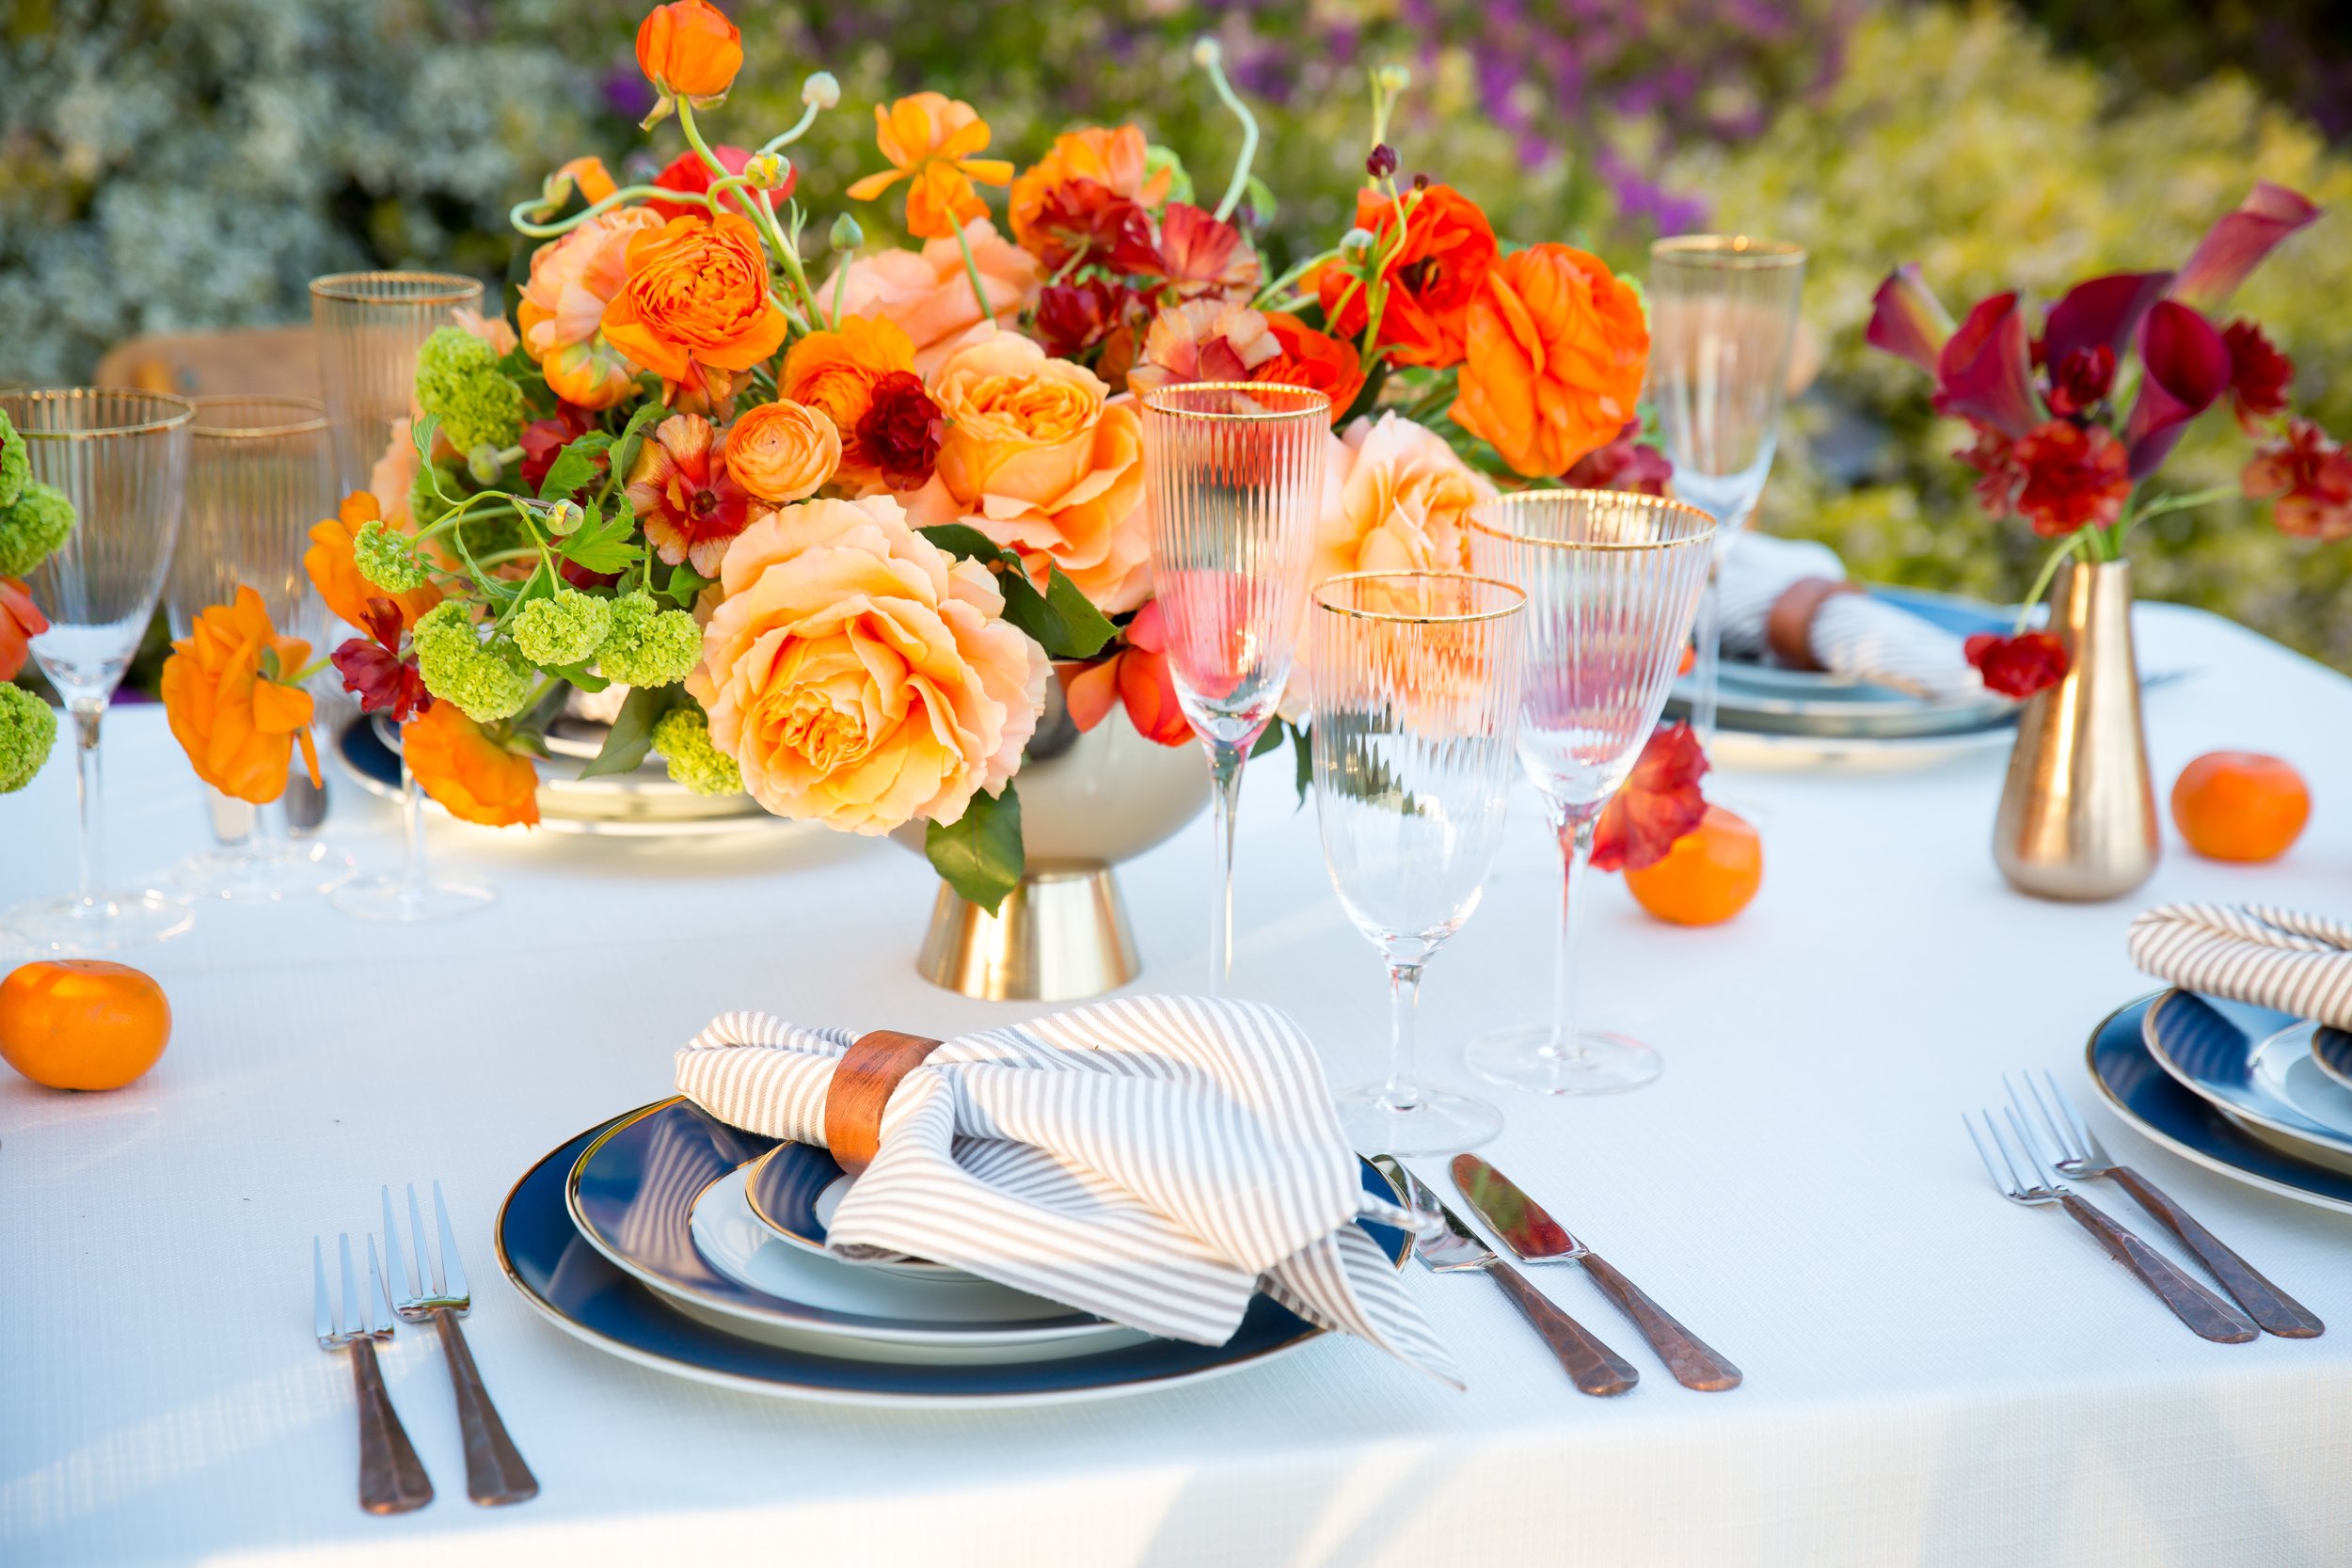 www.santabarbarawedding.com | Bright Event Rentals | Summer Fun to Fall Fabulous | Bright Blue and Vibrant Wedding Table Designs and Decor